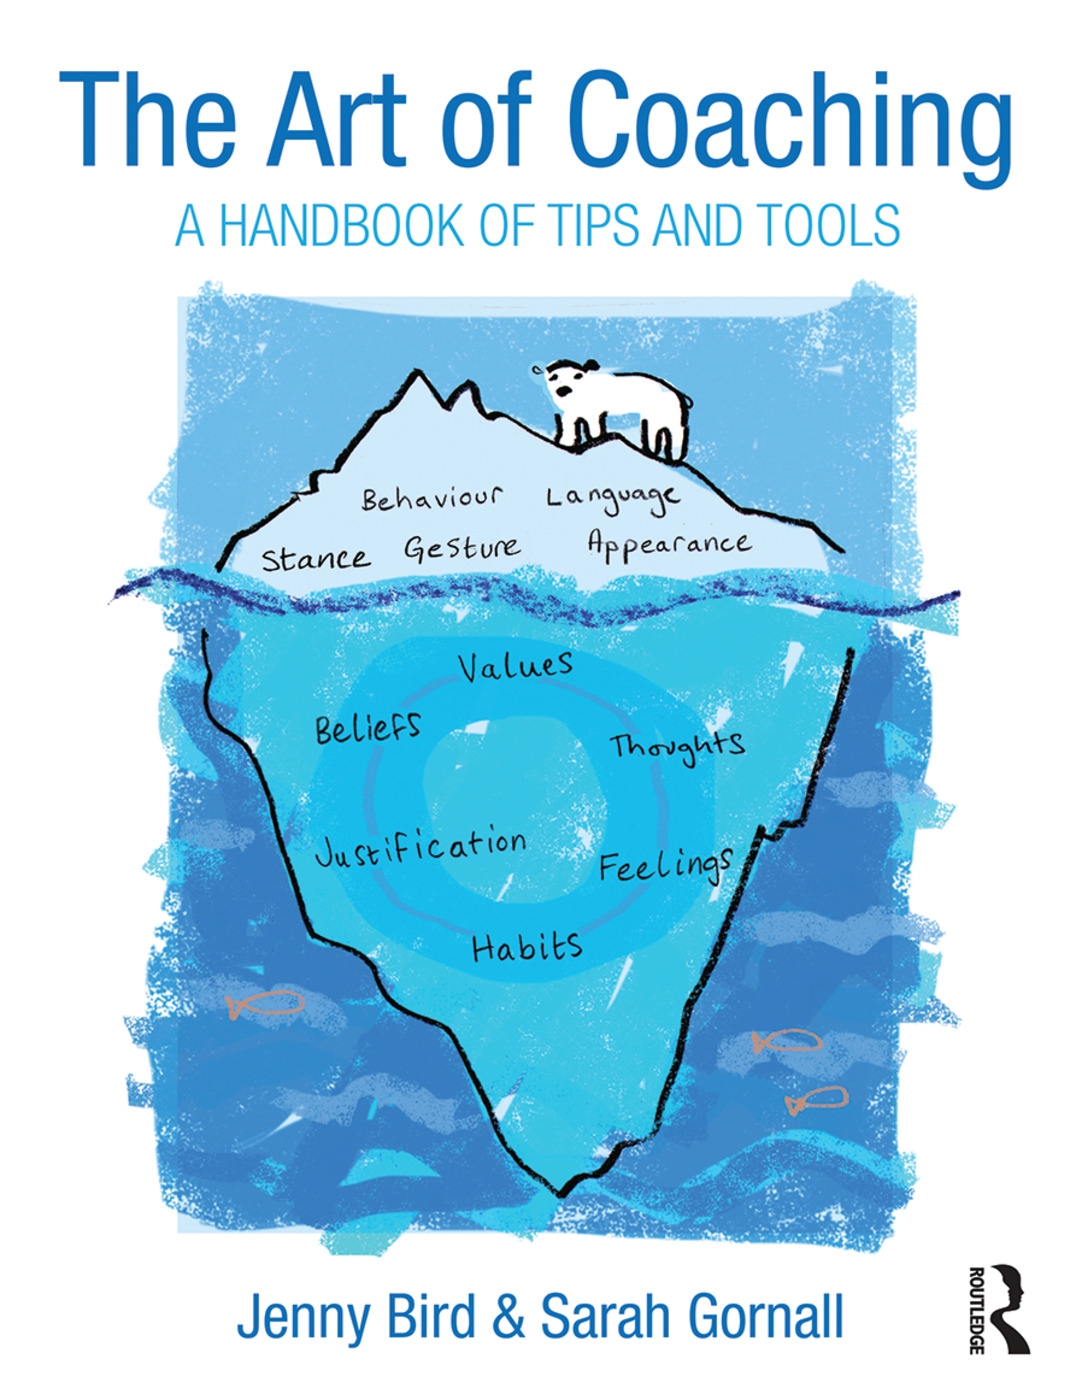 The Art of Coaching: A Handbook of Tips and Tools